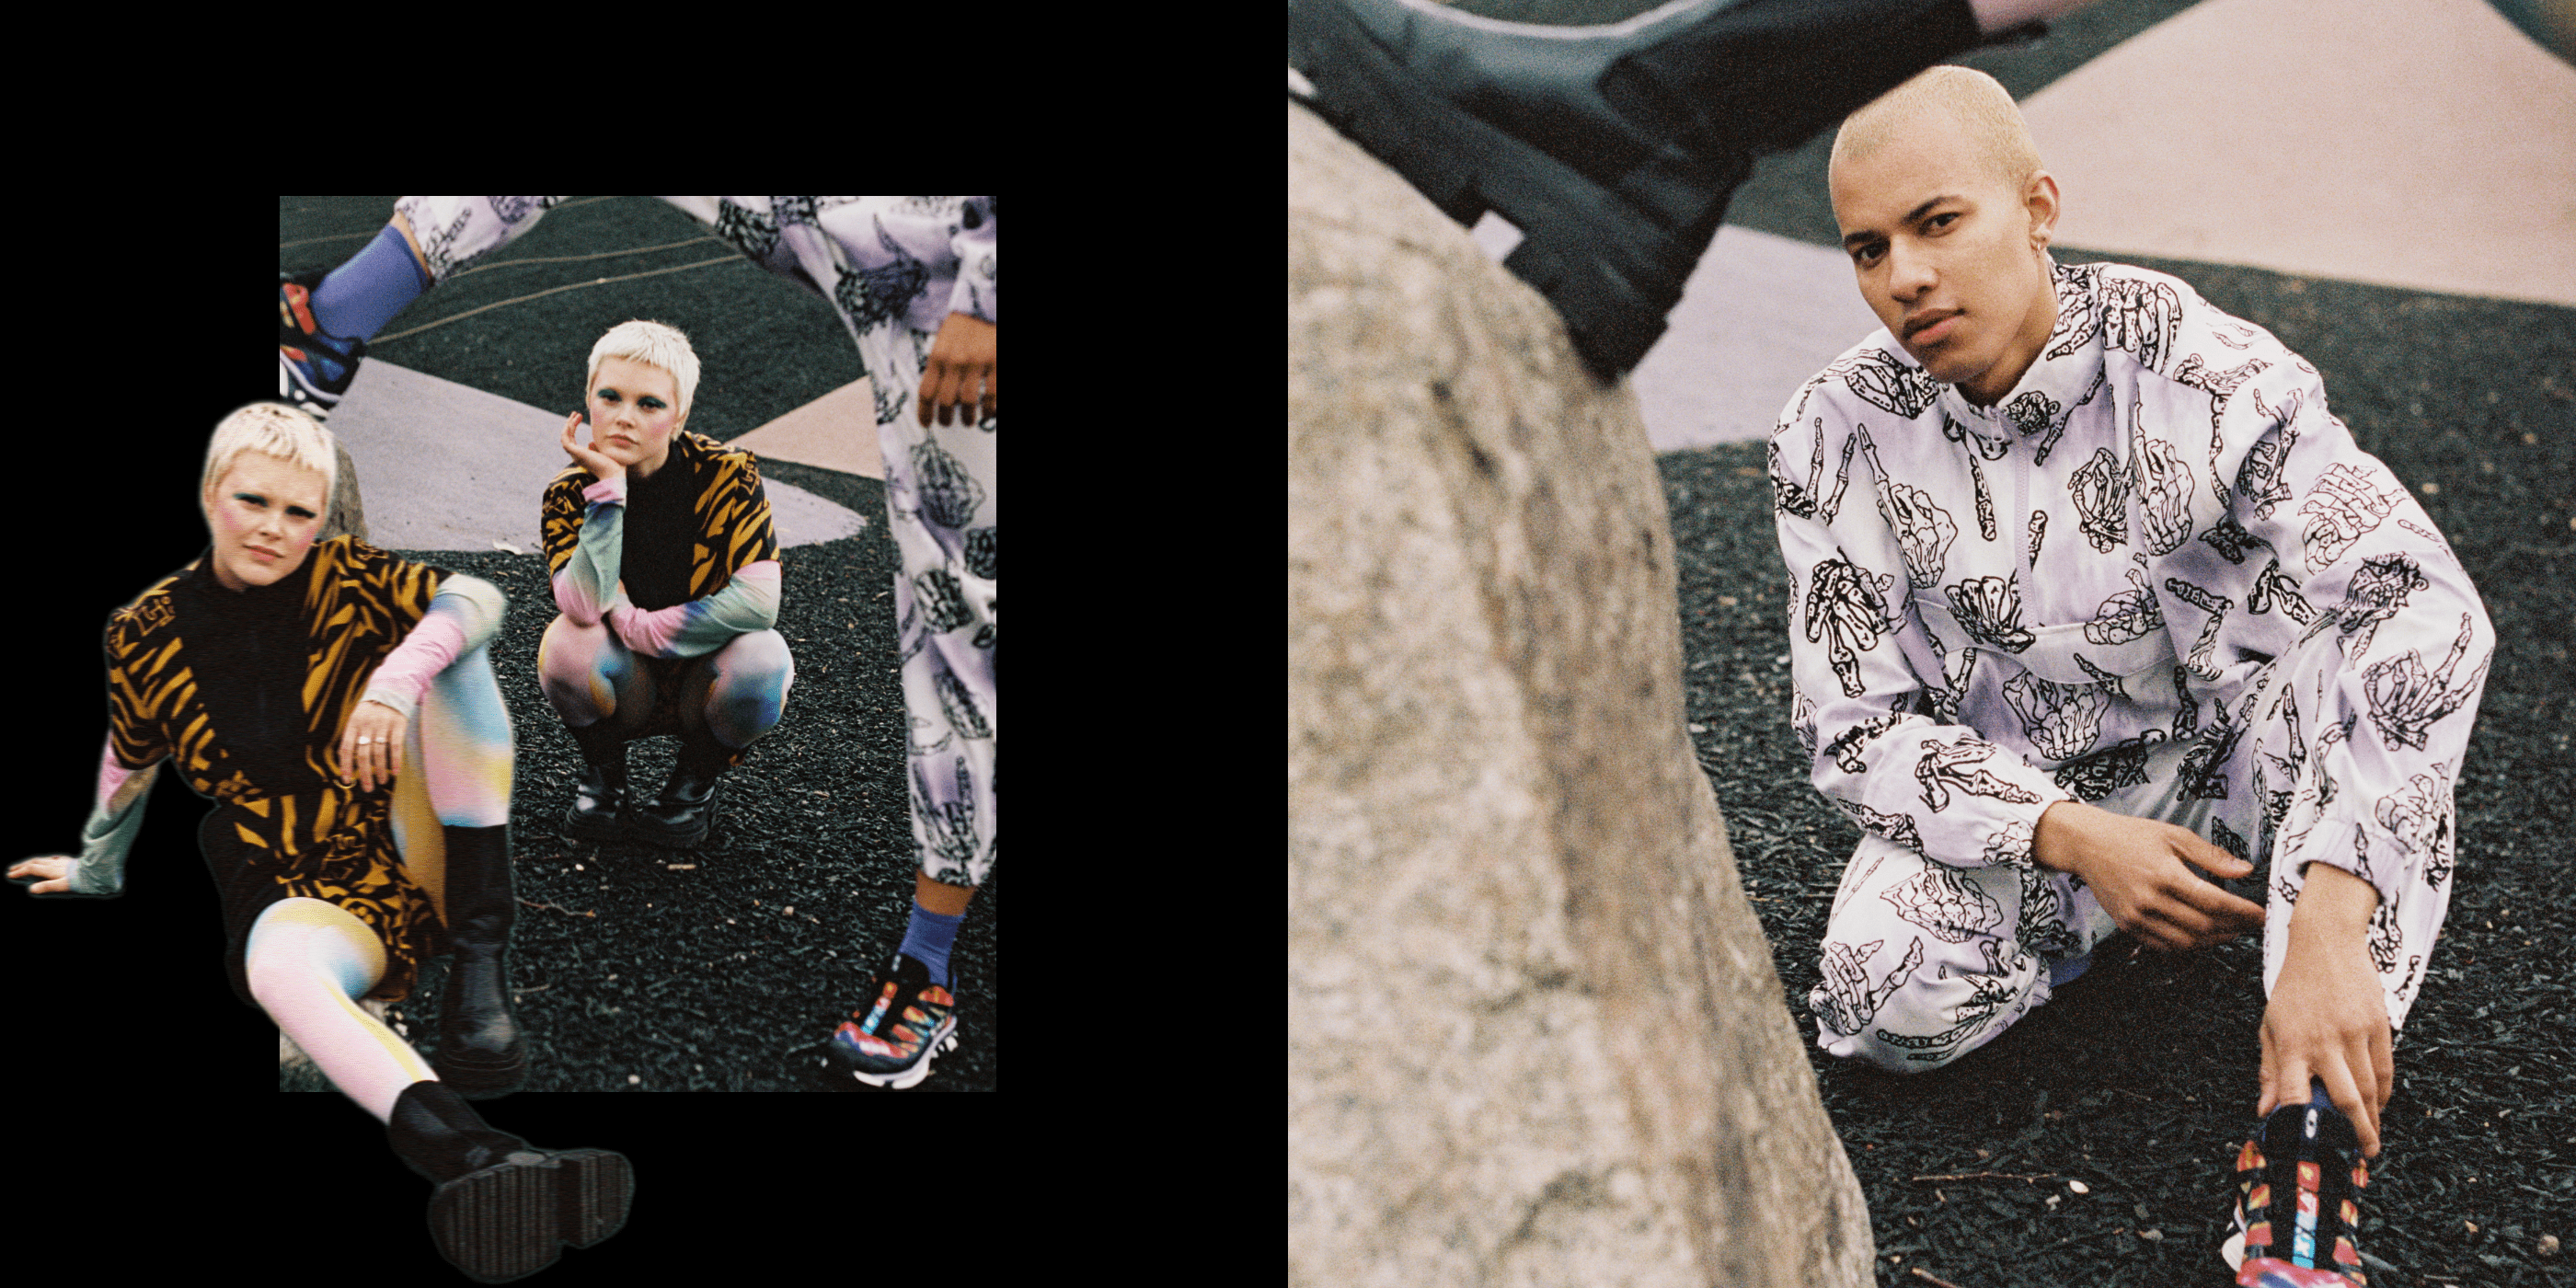 OUT OF THIS WORLD EDITORIAL